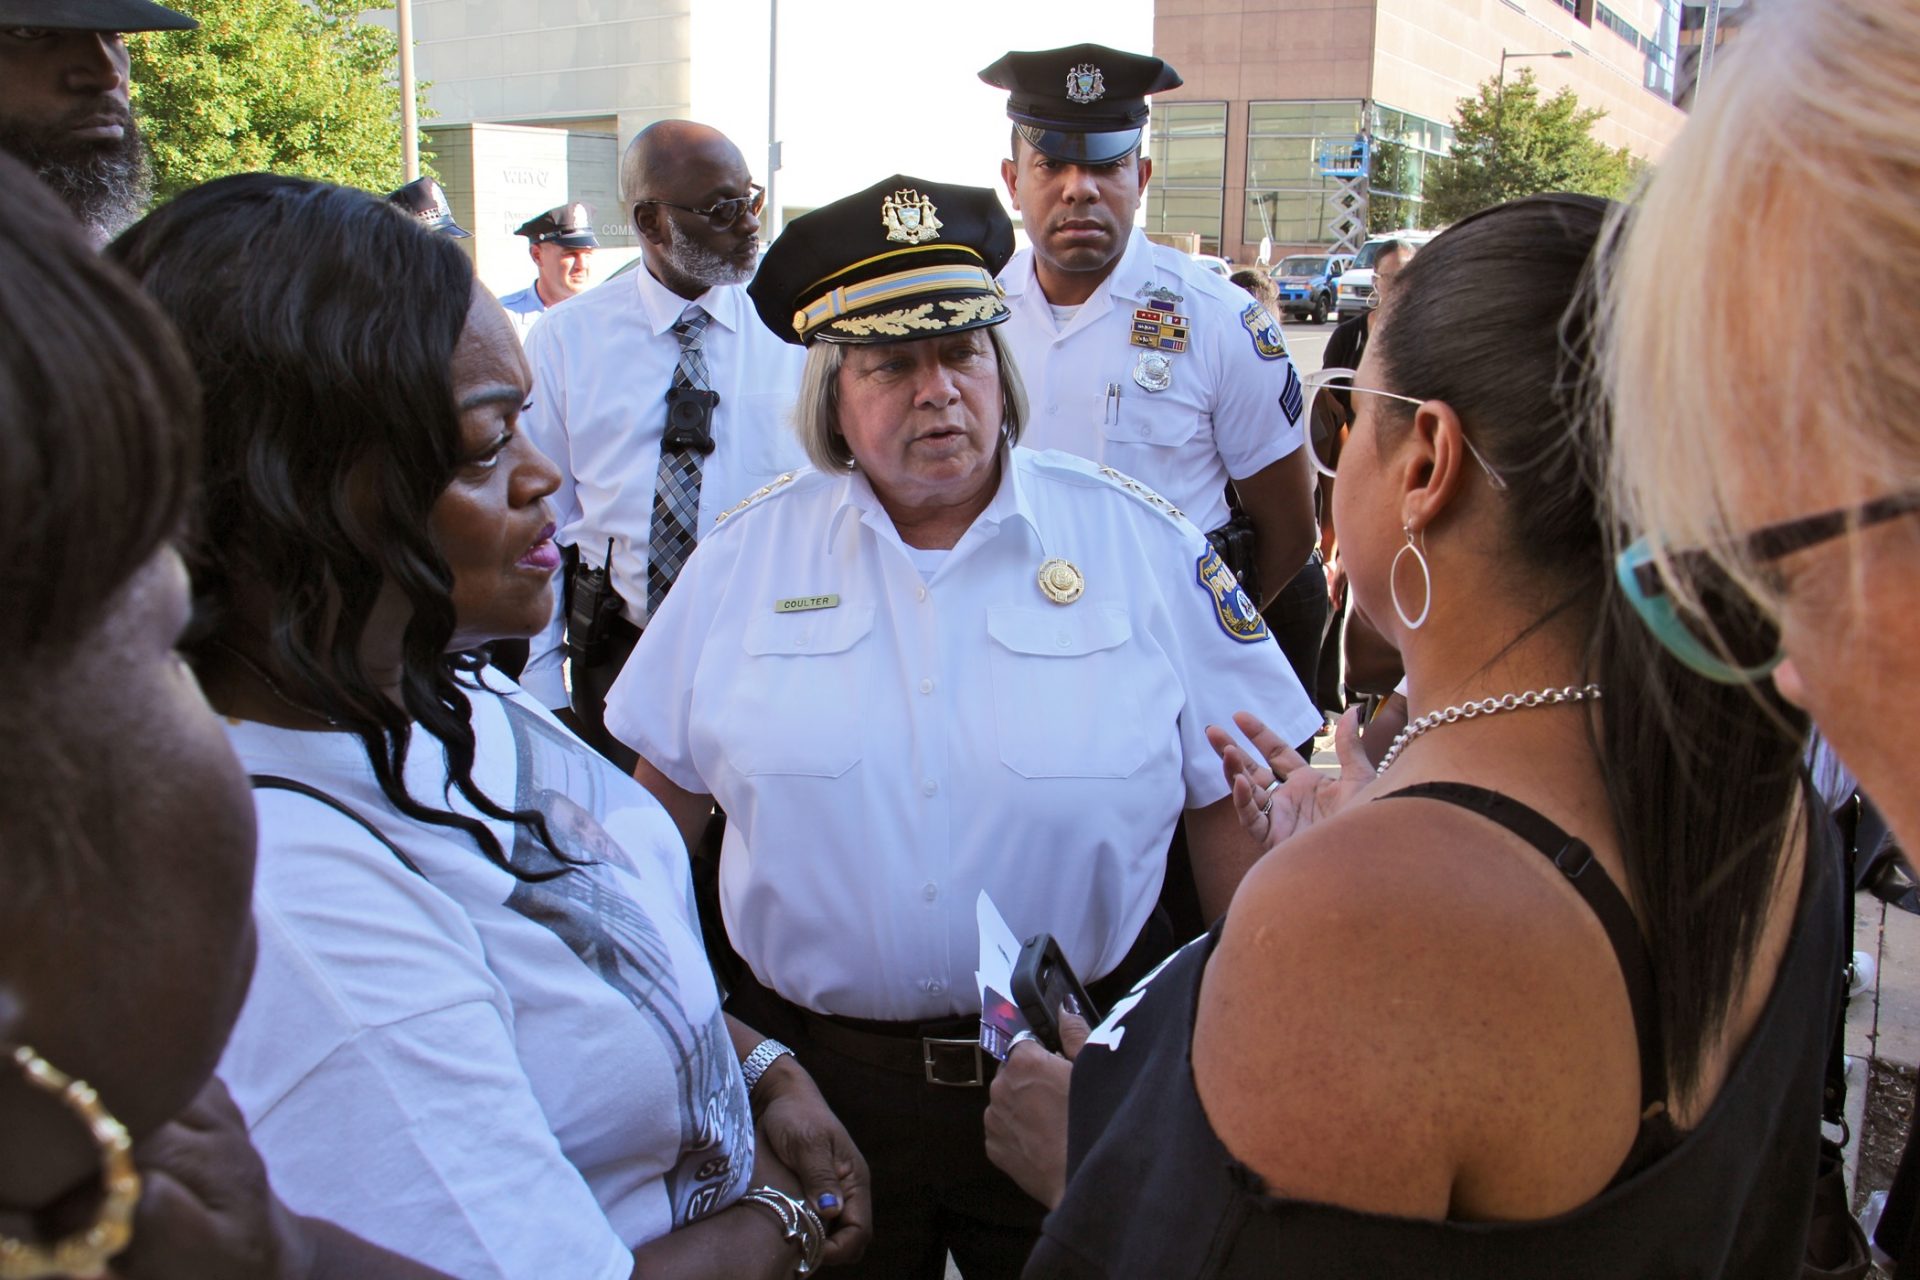 Police Commissioner Christine Coulter talks with the mothers of homicide victims during a demonstration at the police station to call attention to unsolved murders.